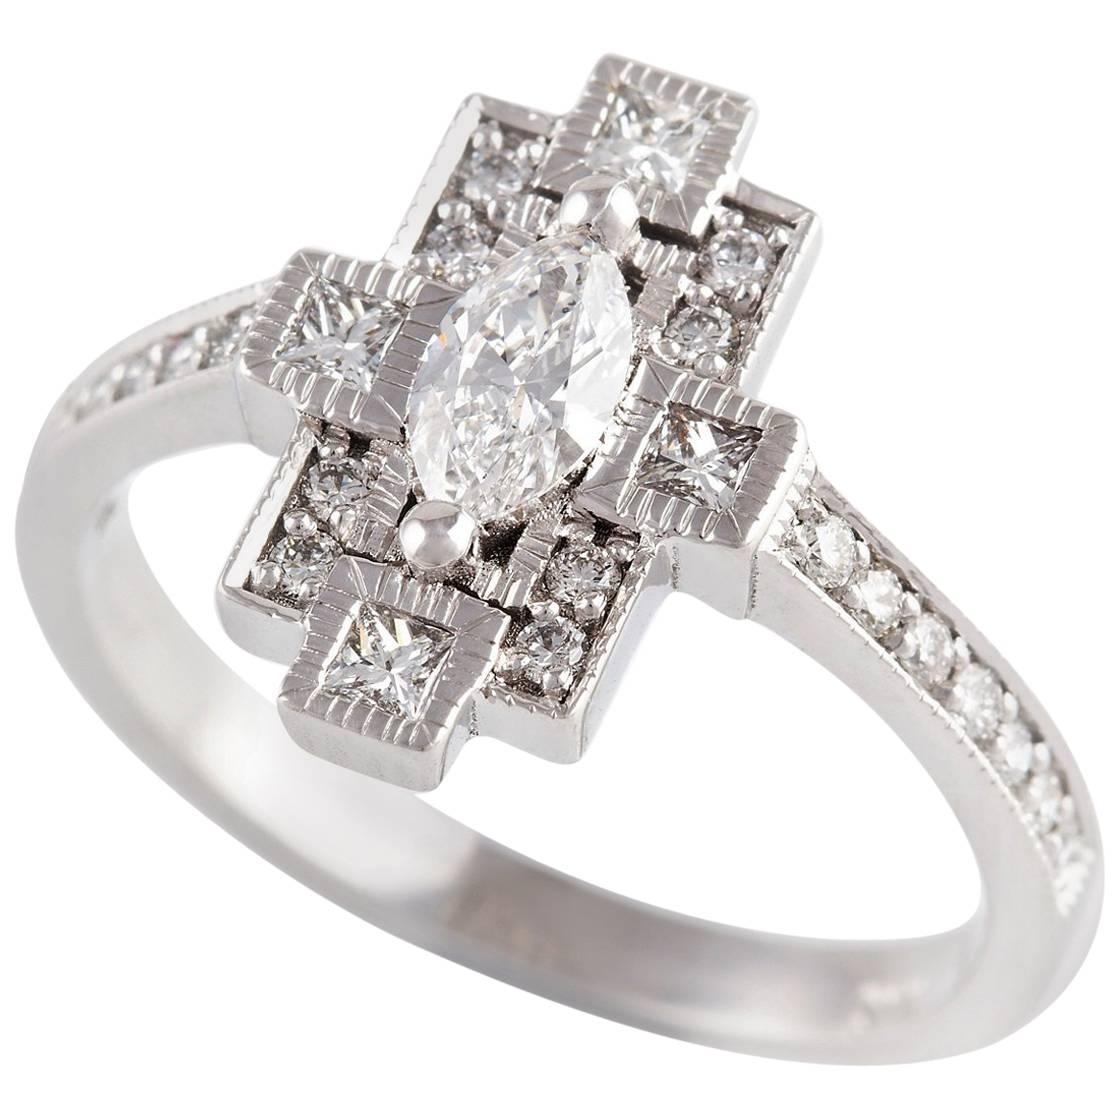  Diamante Ring

This beautiful ring is set with mixed cut white diamonds with fancy textured and milgrain detailing.

1 x Marquise cut diamond: F colour, VS1 clarity, 0.31ct 

4 x Princess cut diamonds: G colour, SI1 claroty, 0.05ct each

8 x Round